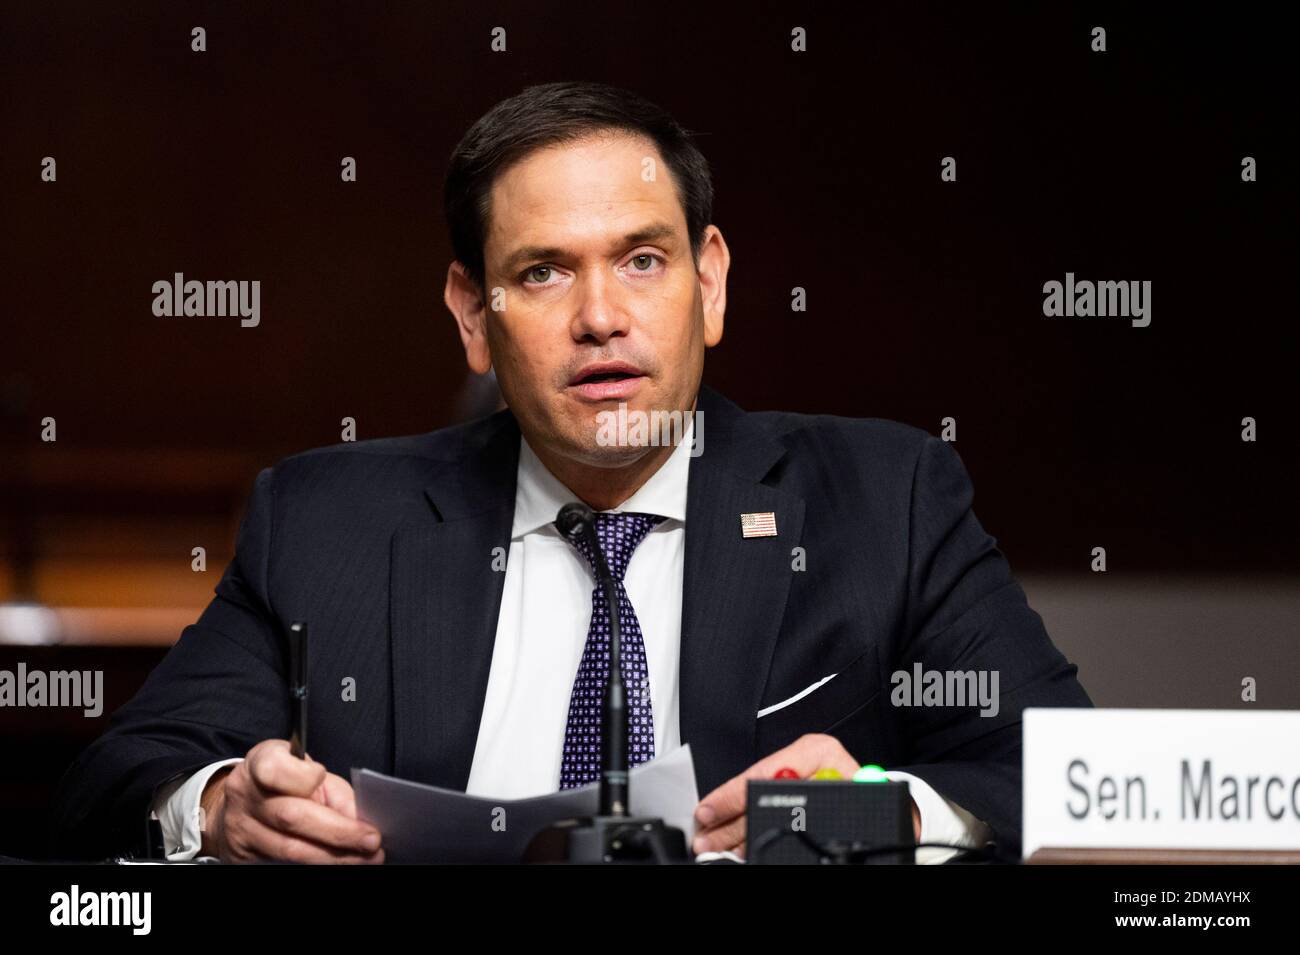 Washington, DC, USA. 16th Dec, 2020. December 16, 2020 - Washington, DC, United States: U.S. Senator MARCO RUBIO (R-FL) speaking at a hearing of the Senate Judiciary Committee's Subcommittee on Border Security and Immigration examining Hong Kong's pro-democracy movement through United States refugee policy. Credit: Michael Brochstein/ZUMA Wire/Alamy Live News Stock Photo